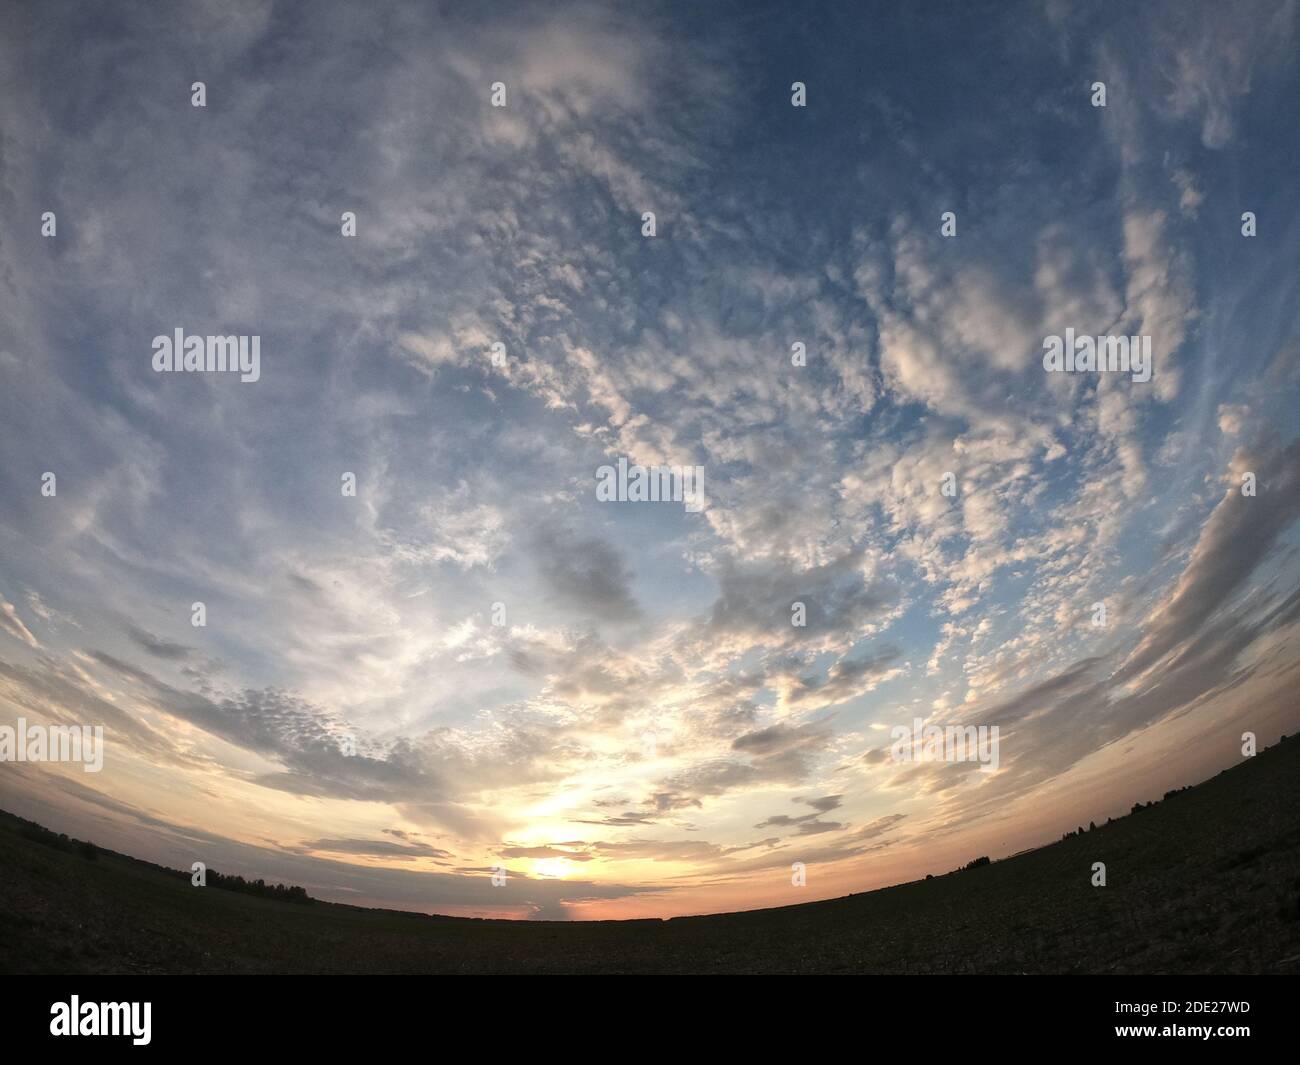 Evening landscape shot with the effect of a fish eye. Dramatic sky. Stock Photo